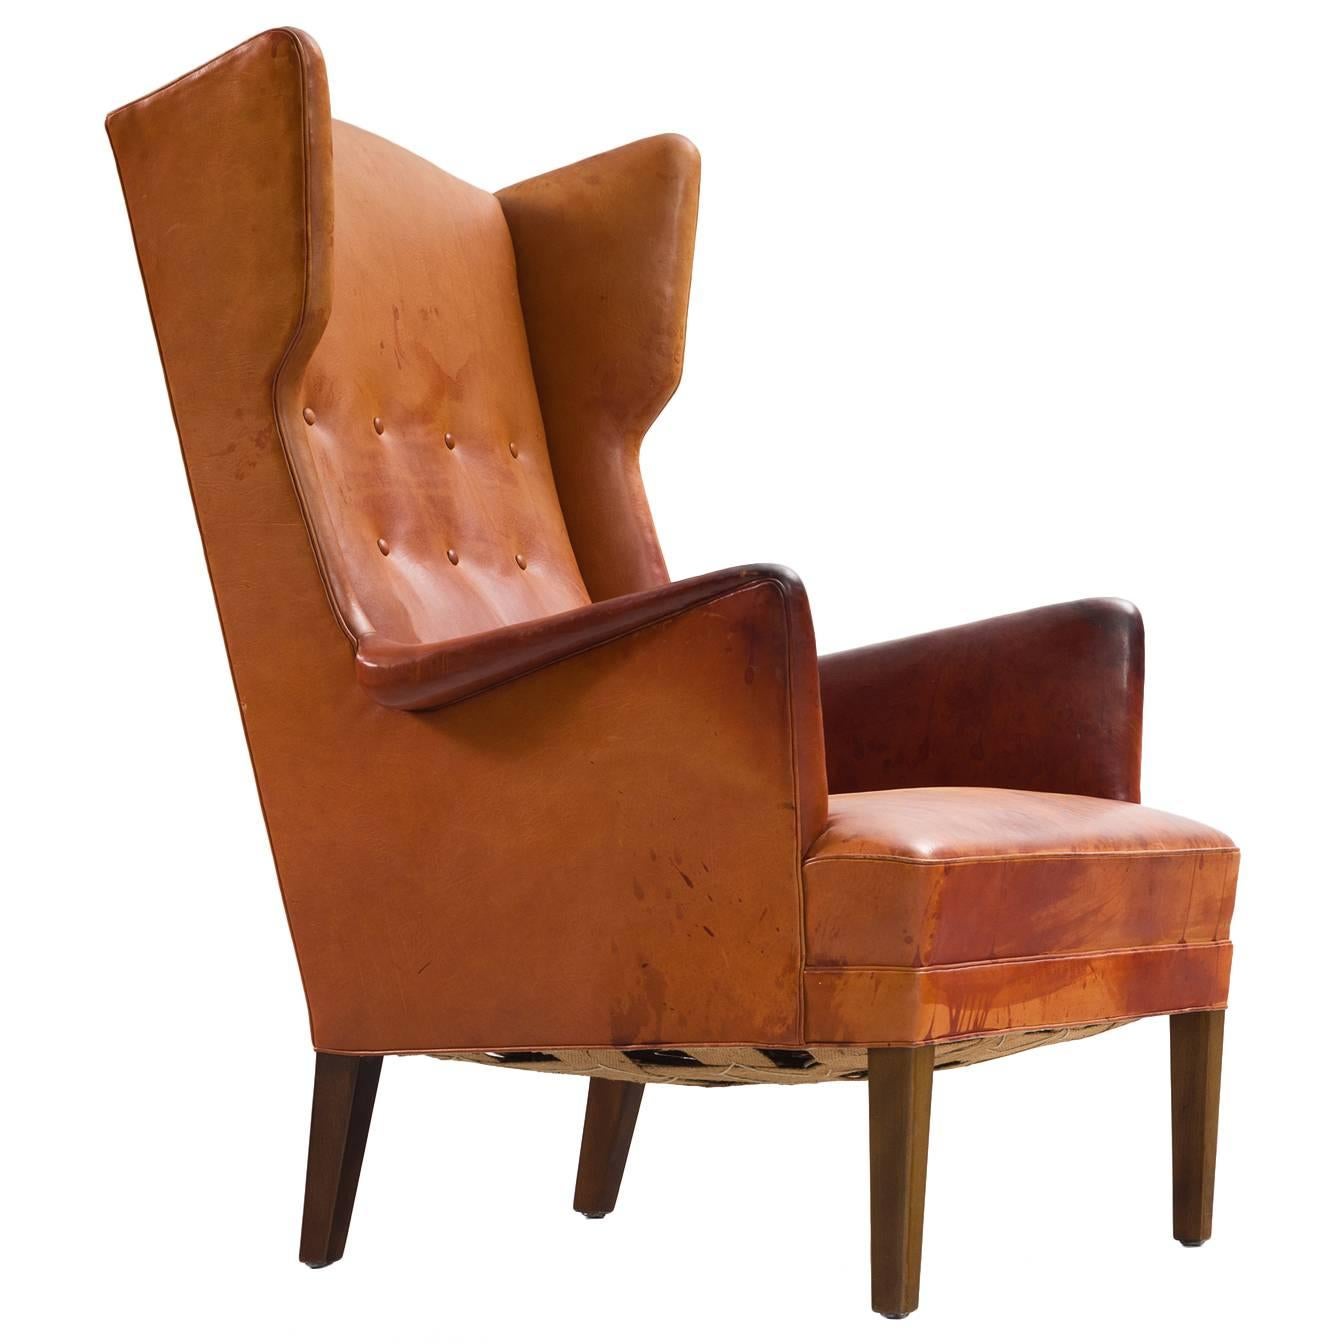 Frits Henningsen Wingback Lounge Chair in Original Cognac Leather